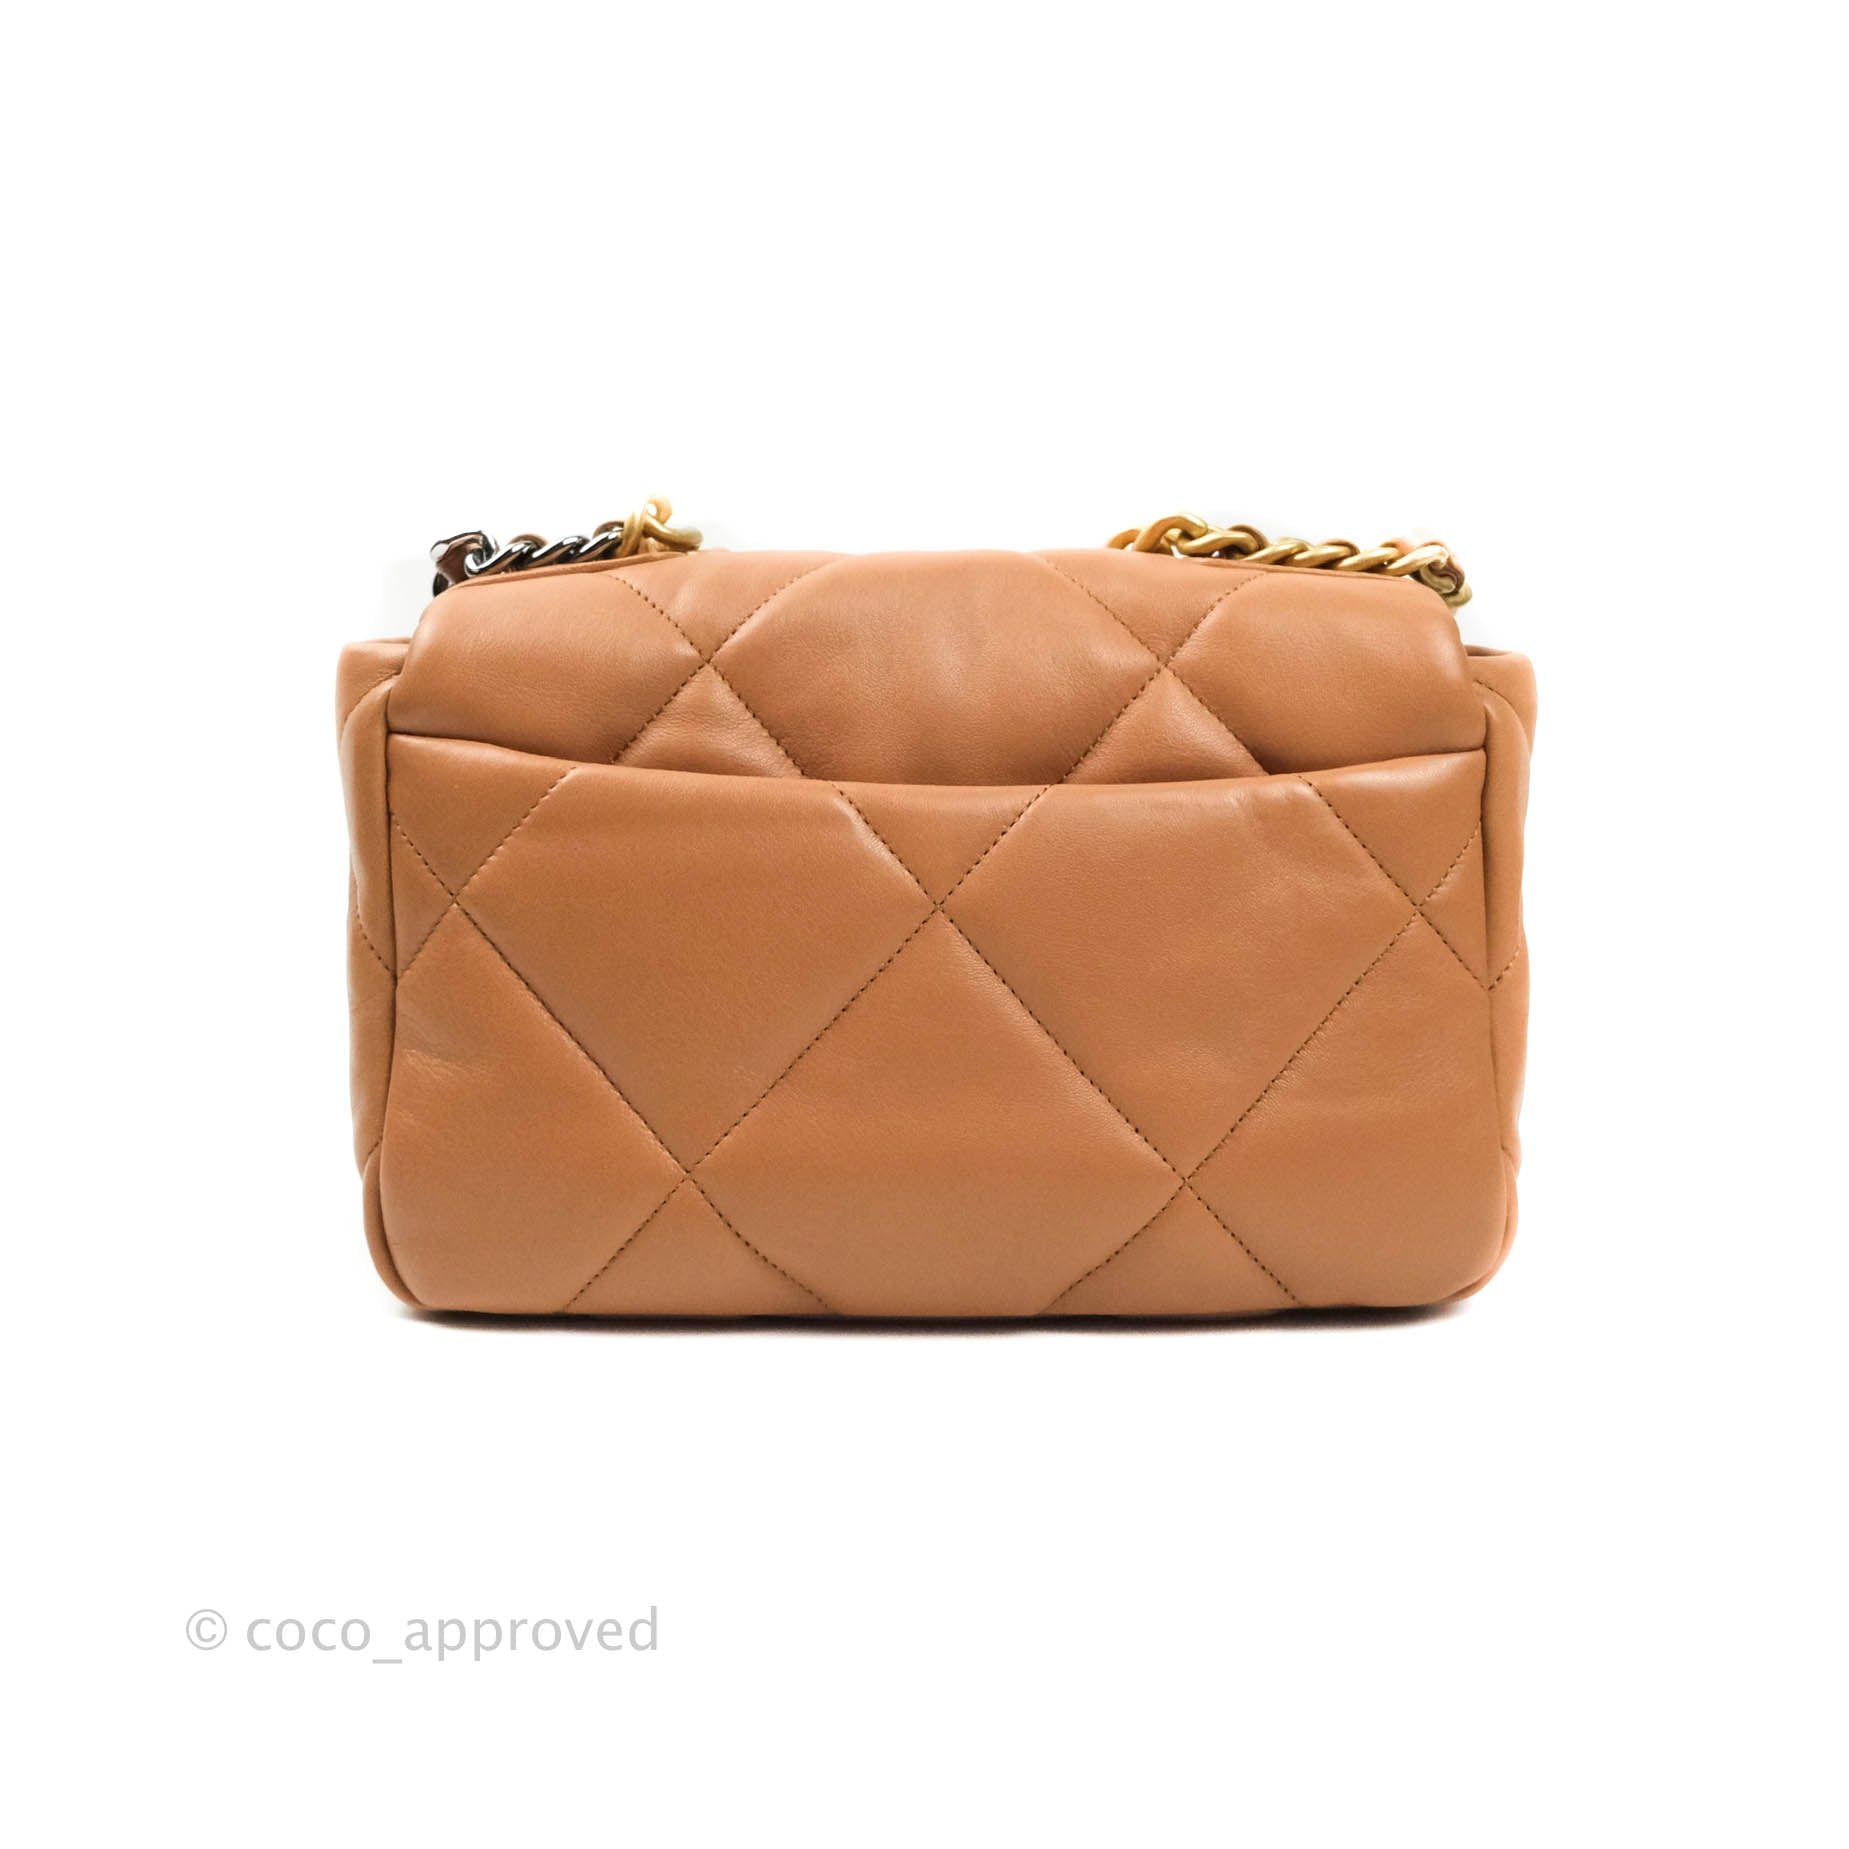 Chanel 19 Small Dark Beige Caramel Mixed Hardware 21P – Coco Approved Studio